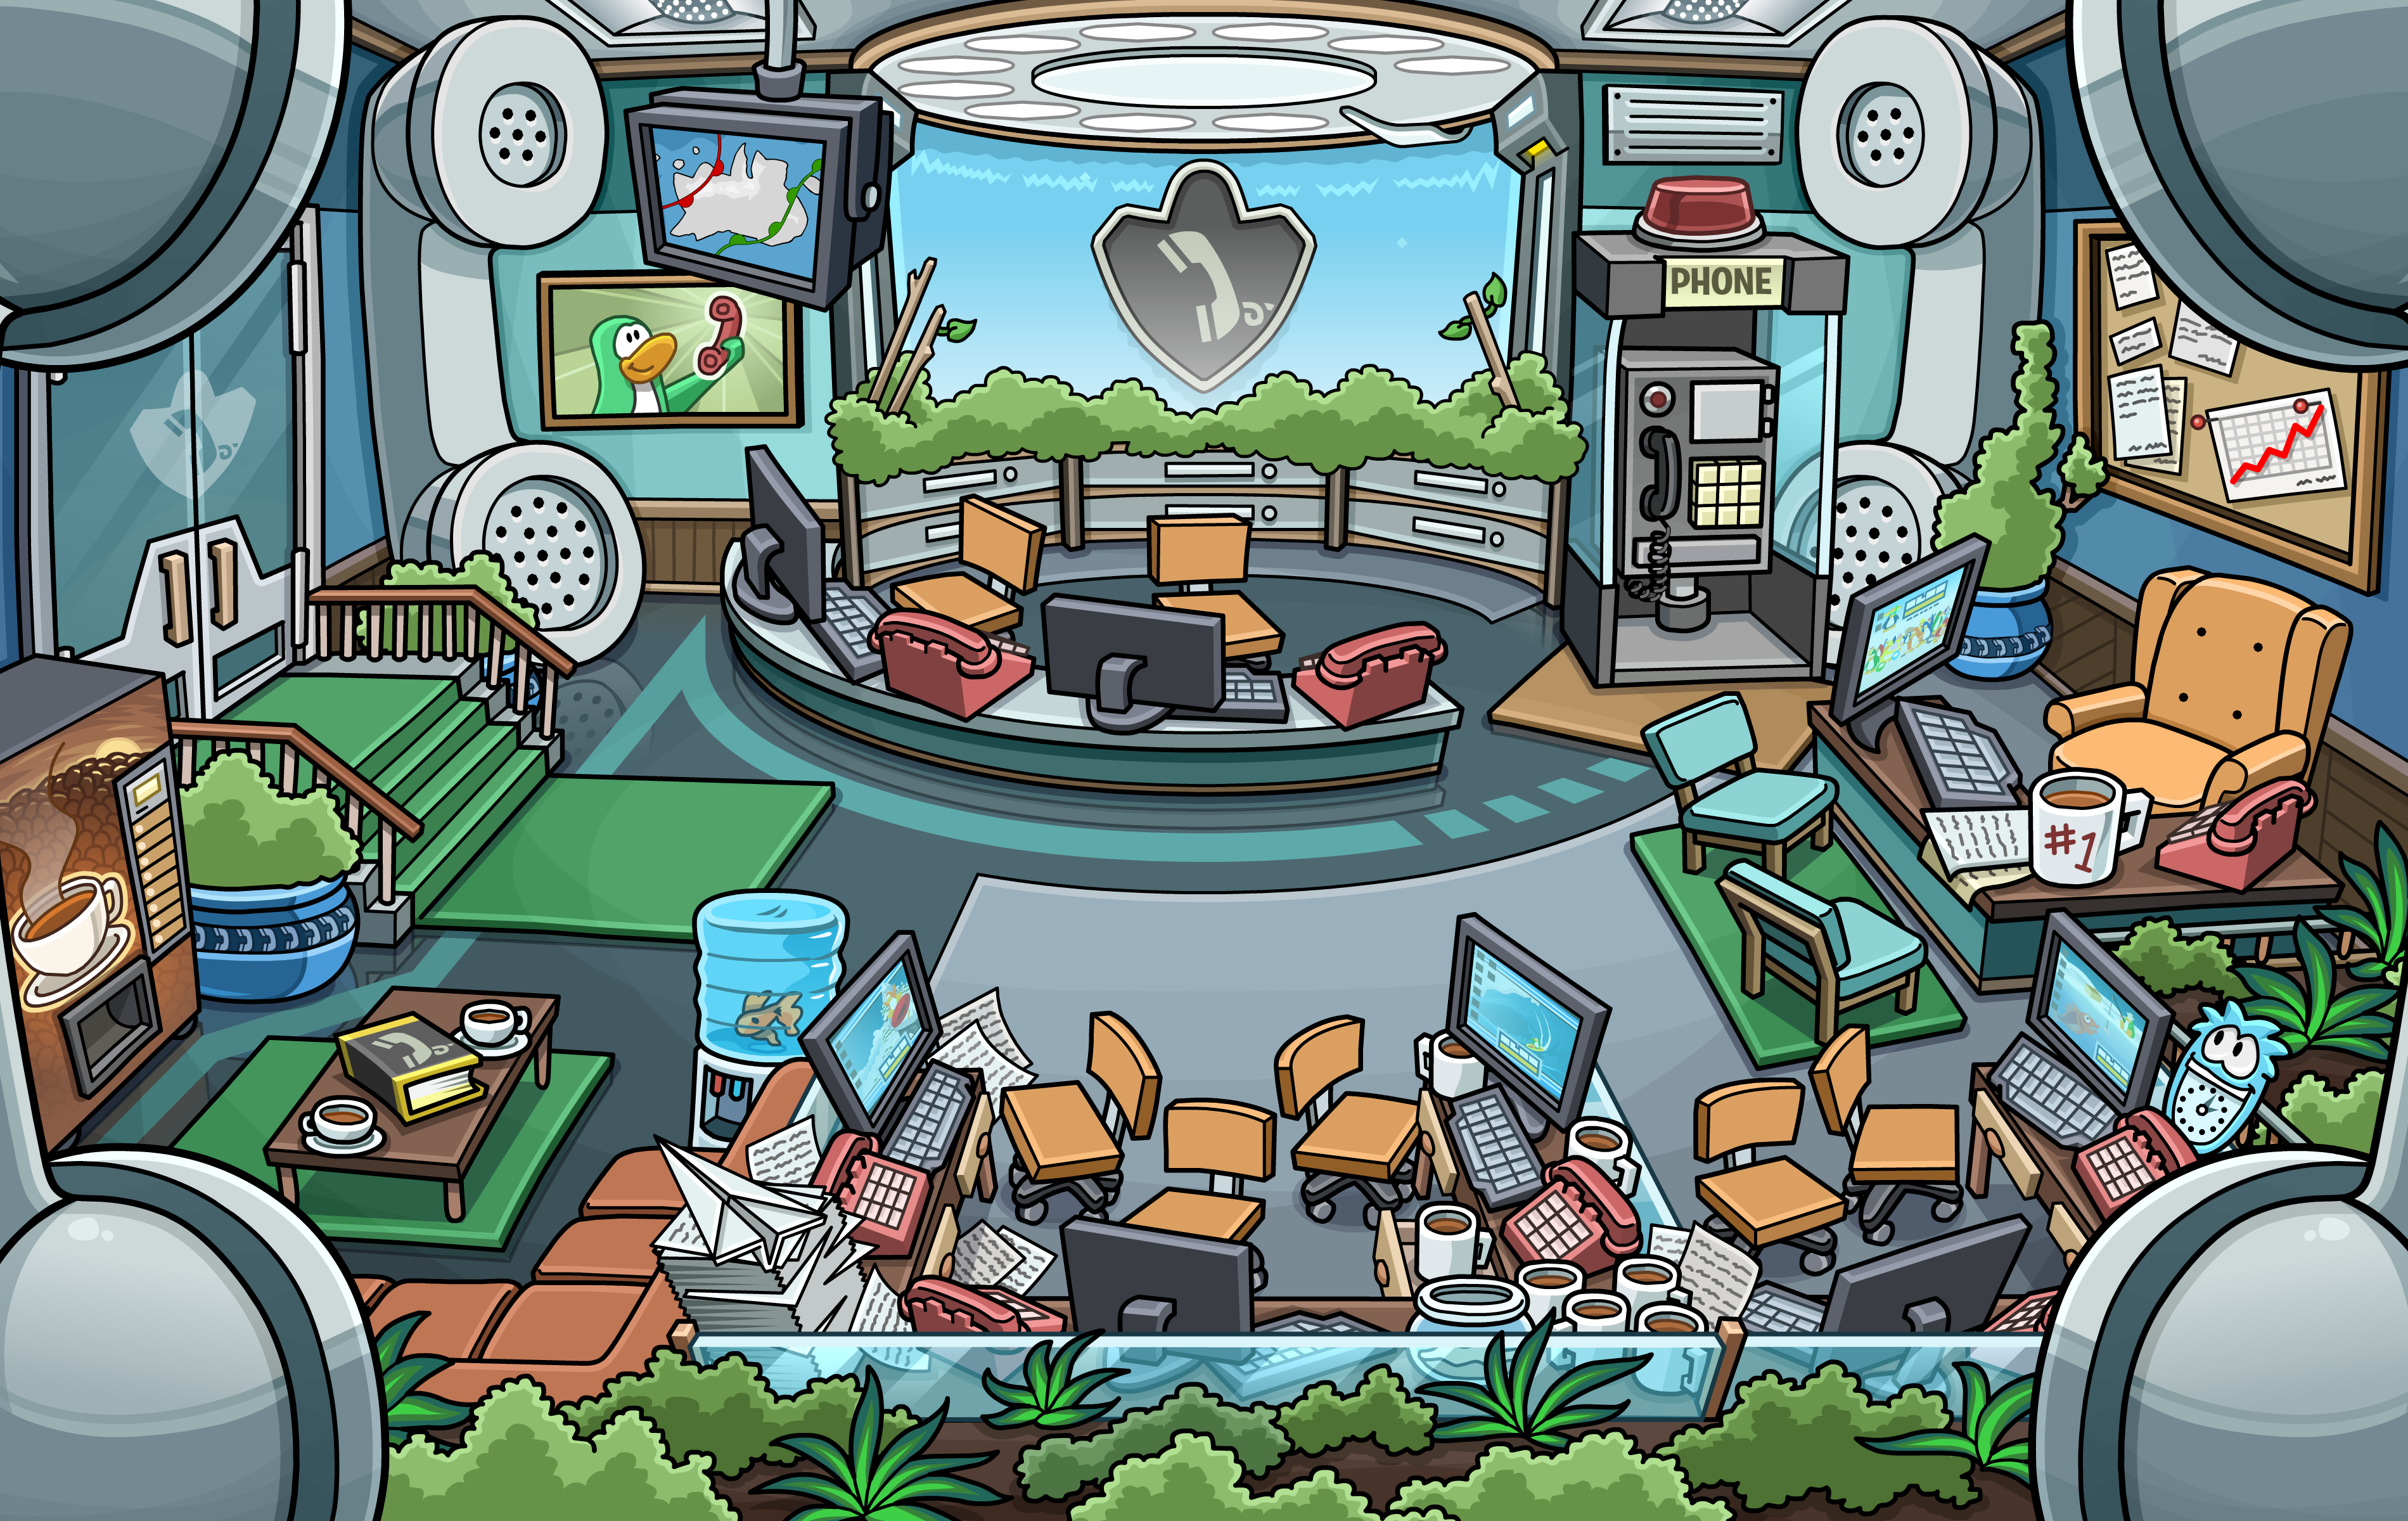 Club Penguin Discussion: Old Rooms vs Newly Redesigned Rooms